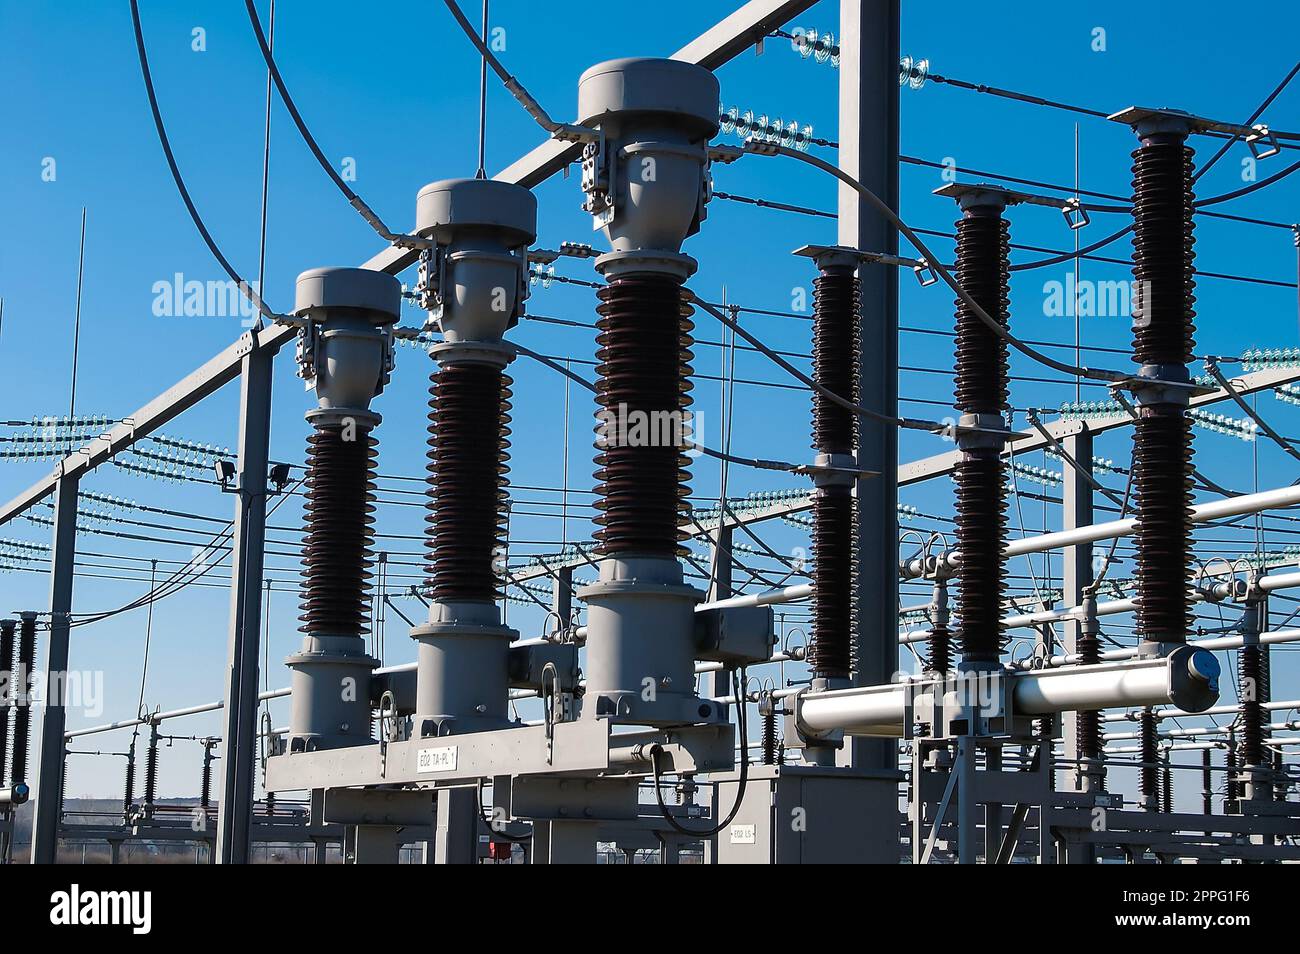 Electricity mast or overhead line mast for power supply and power distribution in the power grid Stock Photo